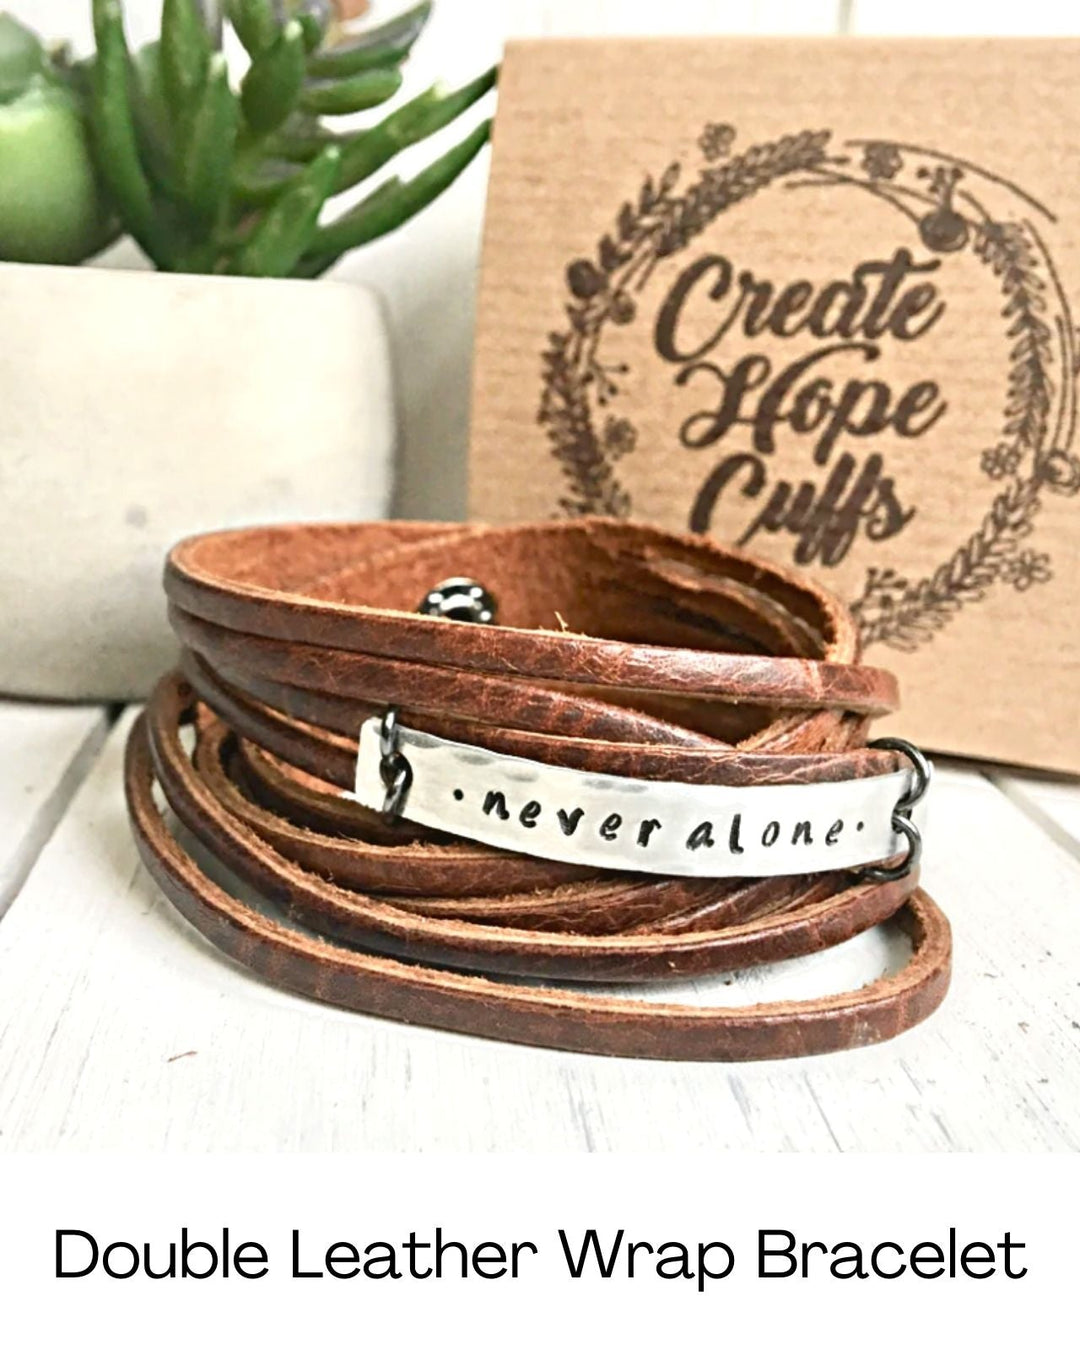 Small Rounded Derby Natural Brown Leather Earrings | Hypoallergenic | Women Leather Earrings Create Hope Cuffs 